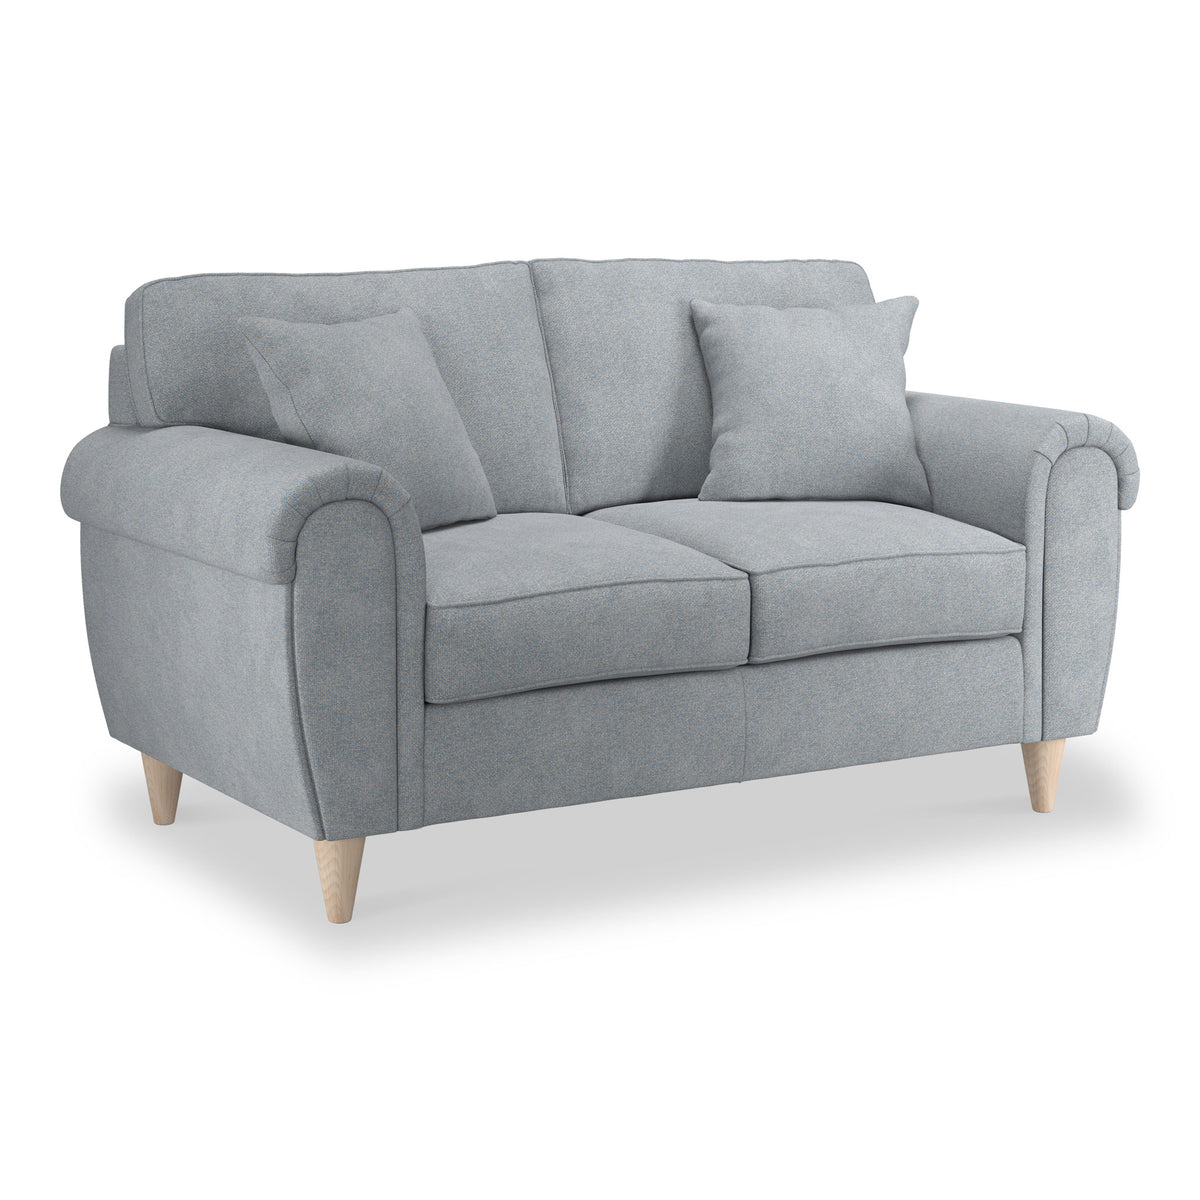 Harry Light Blue 2 Seater Sofa from Roseland Furniture